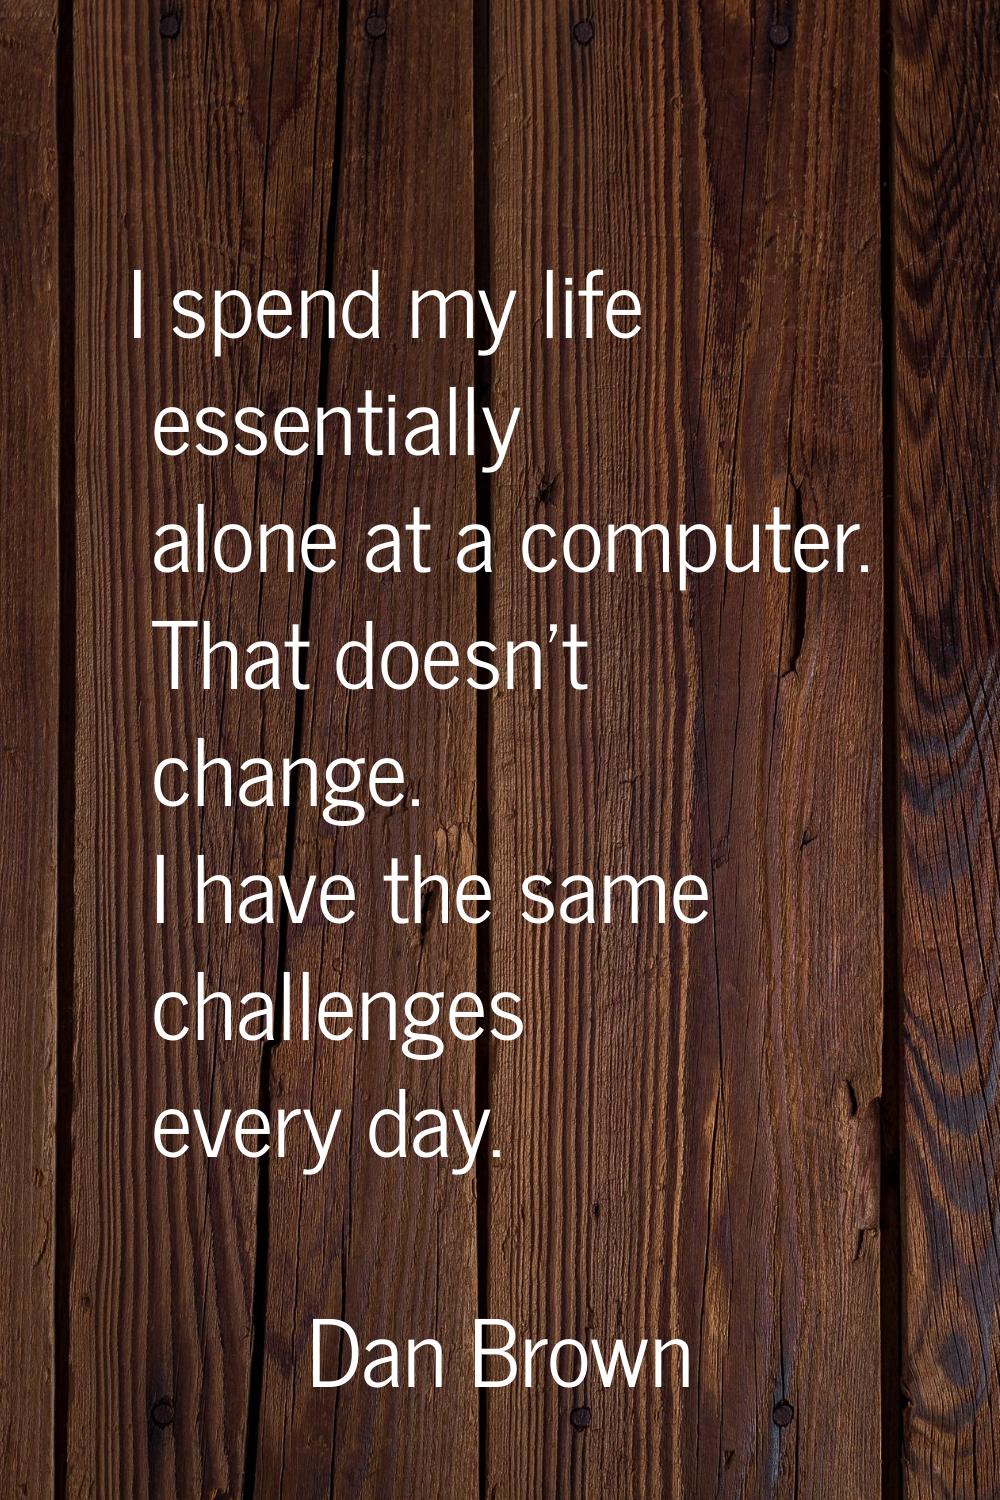 I spend my life essentially alone at a computer. That doesn't change. I have the same challenges ev